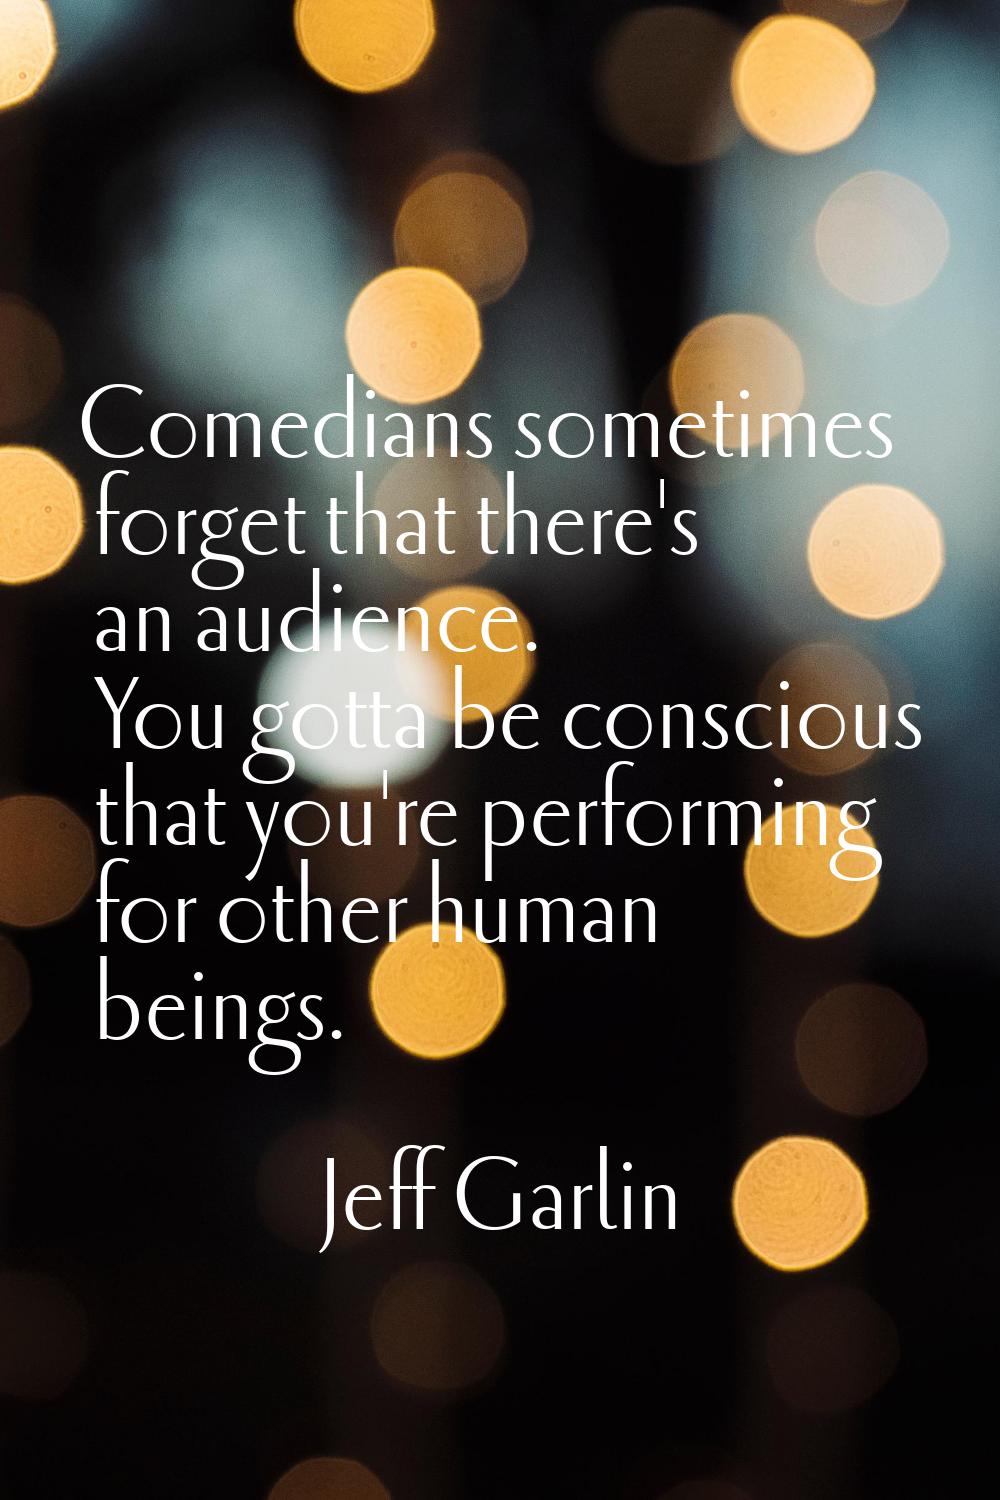 Comedians sometimes forget that there's an audience. You gotta be conscious that you're performing 